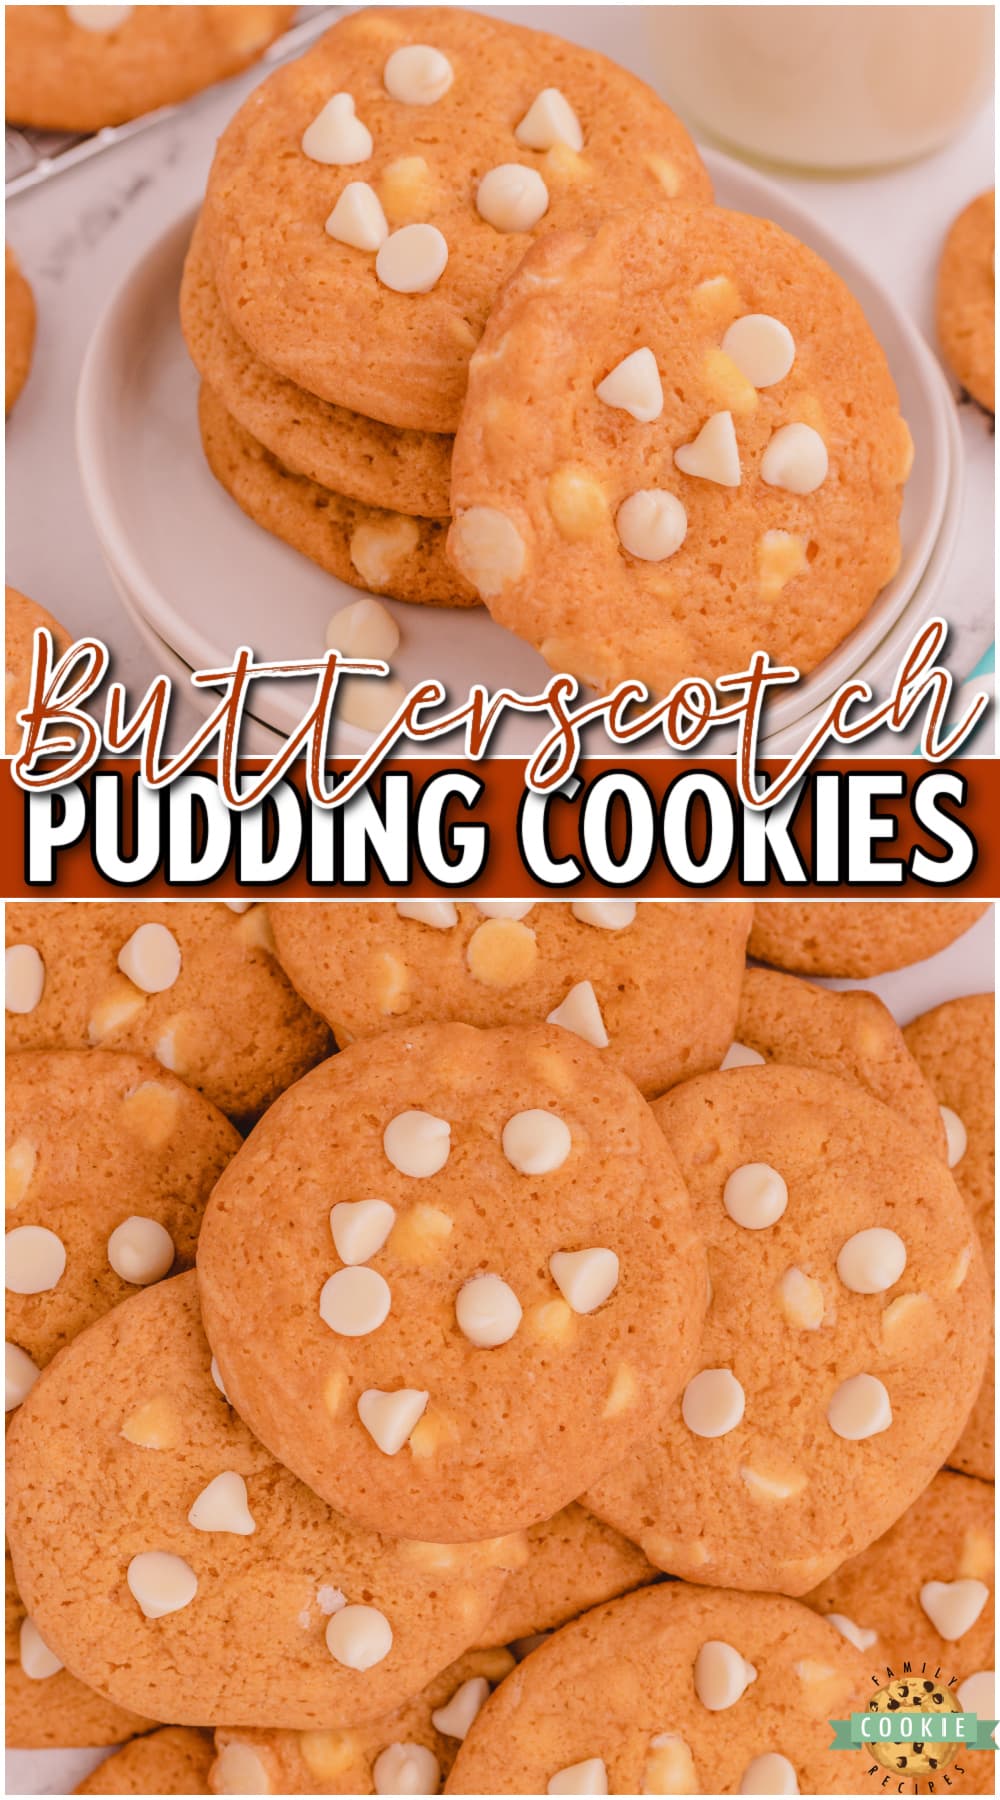 Butterscotch Pudding Cookies are a delightful cookie with great butterscotch flavor! This butterscotch cookie recipe is so simple to make & the pudding gives them the best texture & taste. via @buttergirls